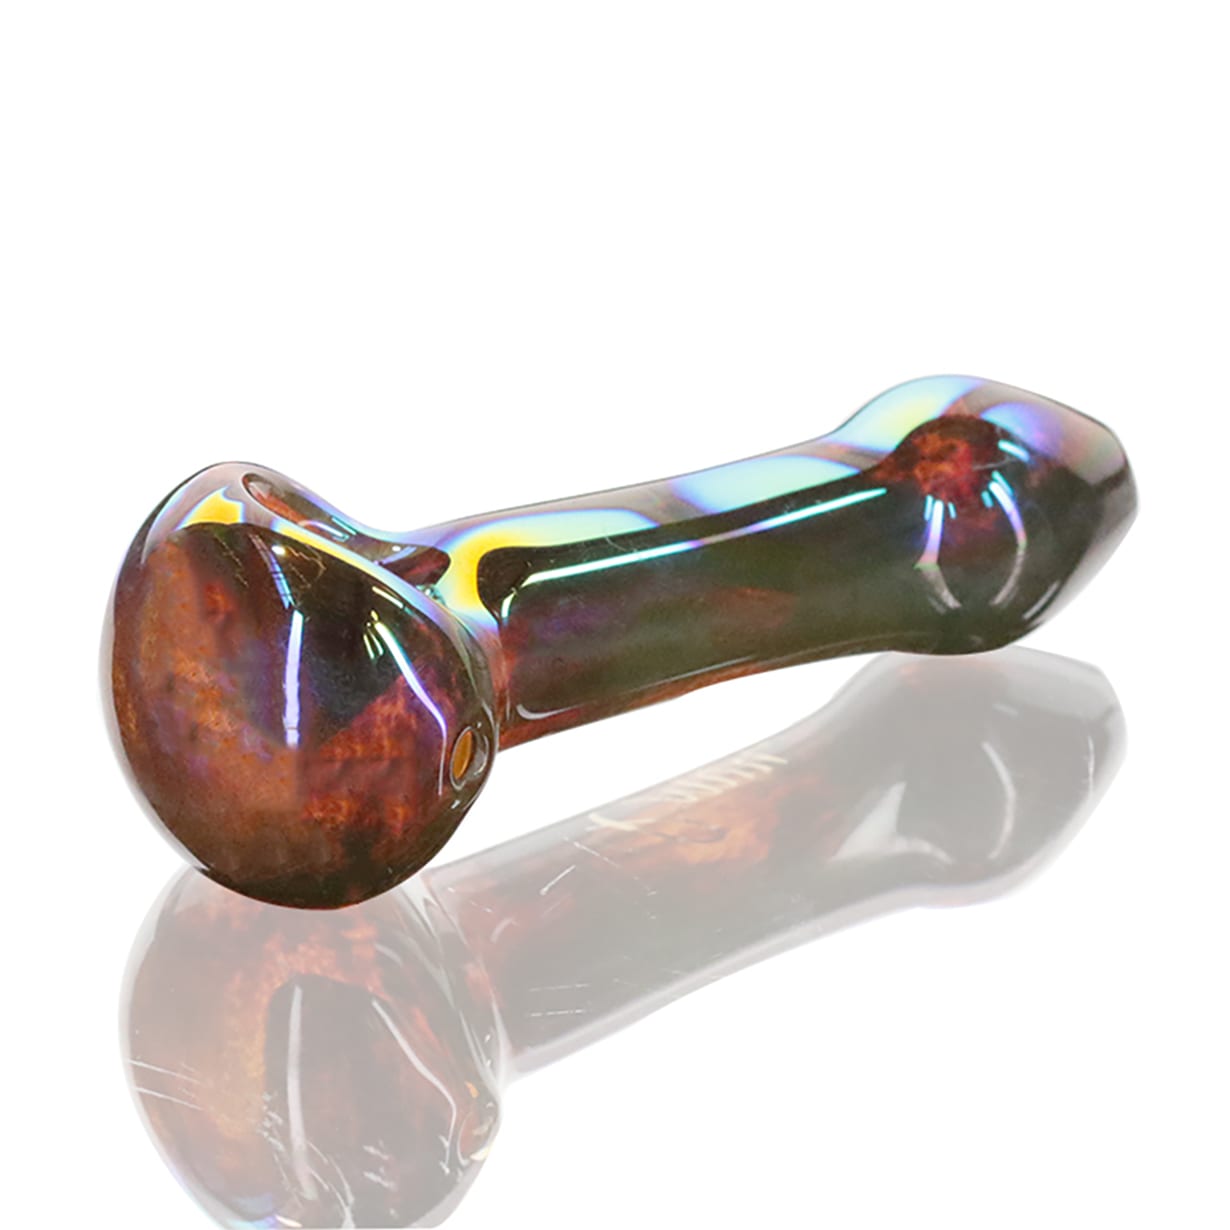 Envy Spoonpipe Speckled Amber